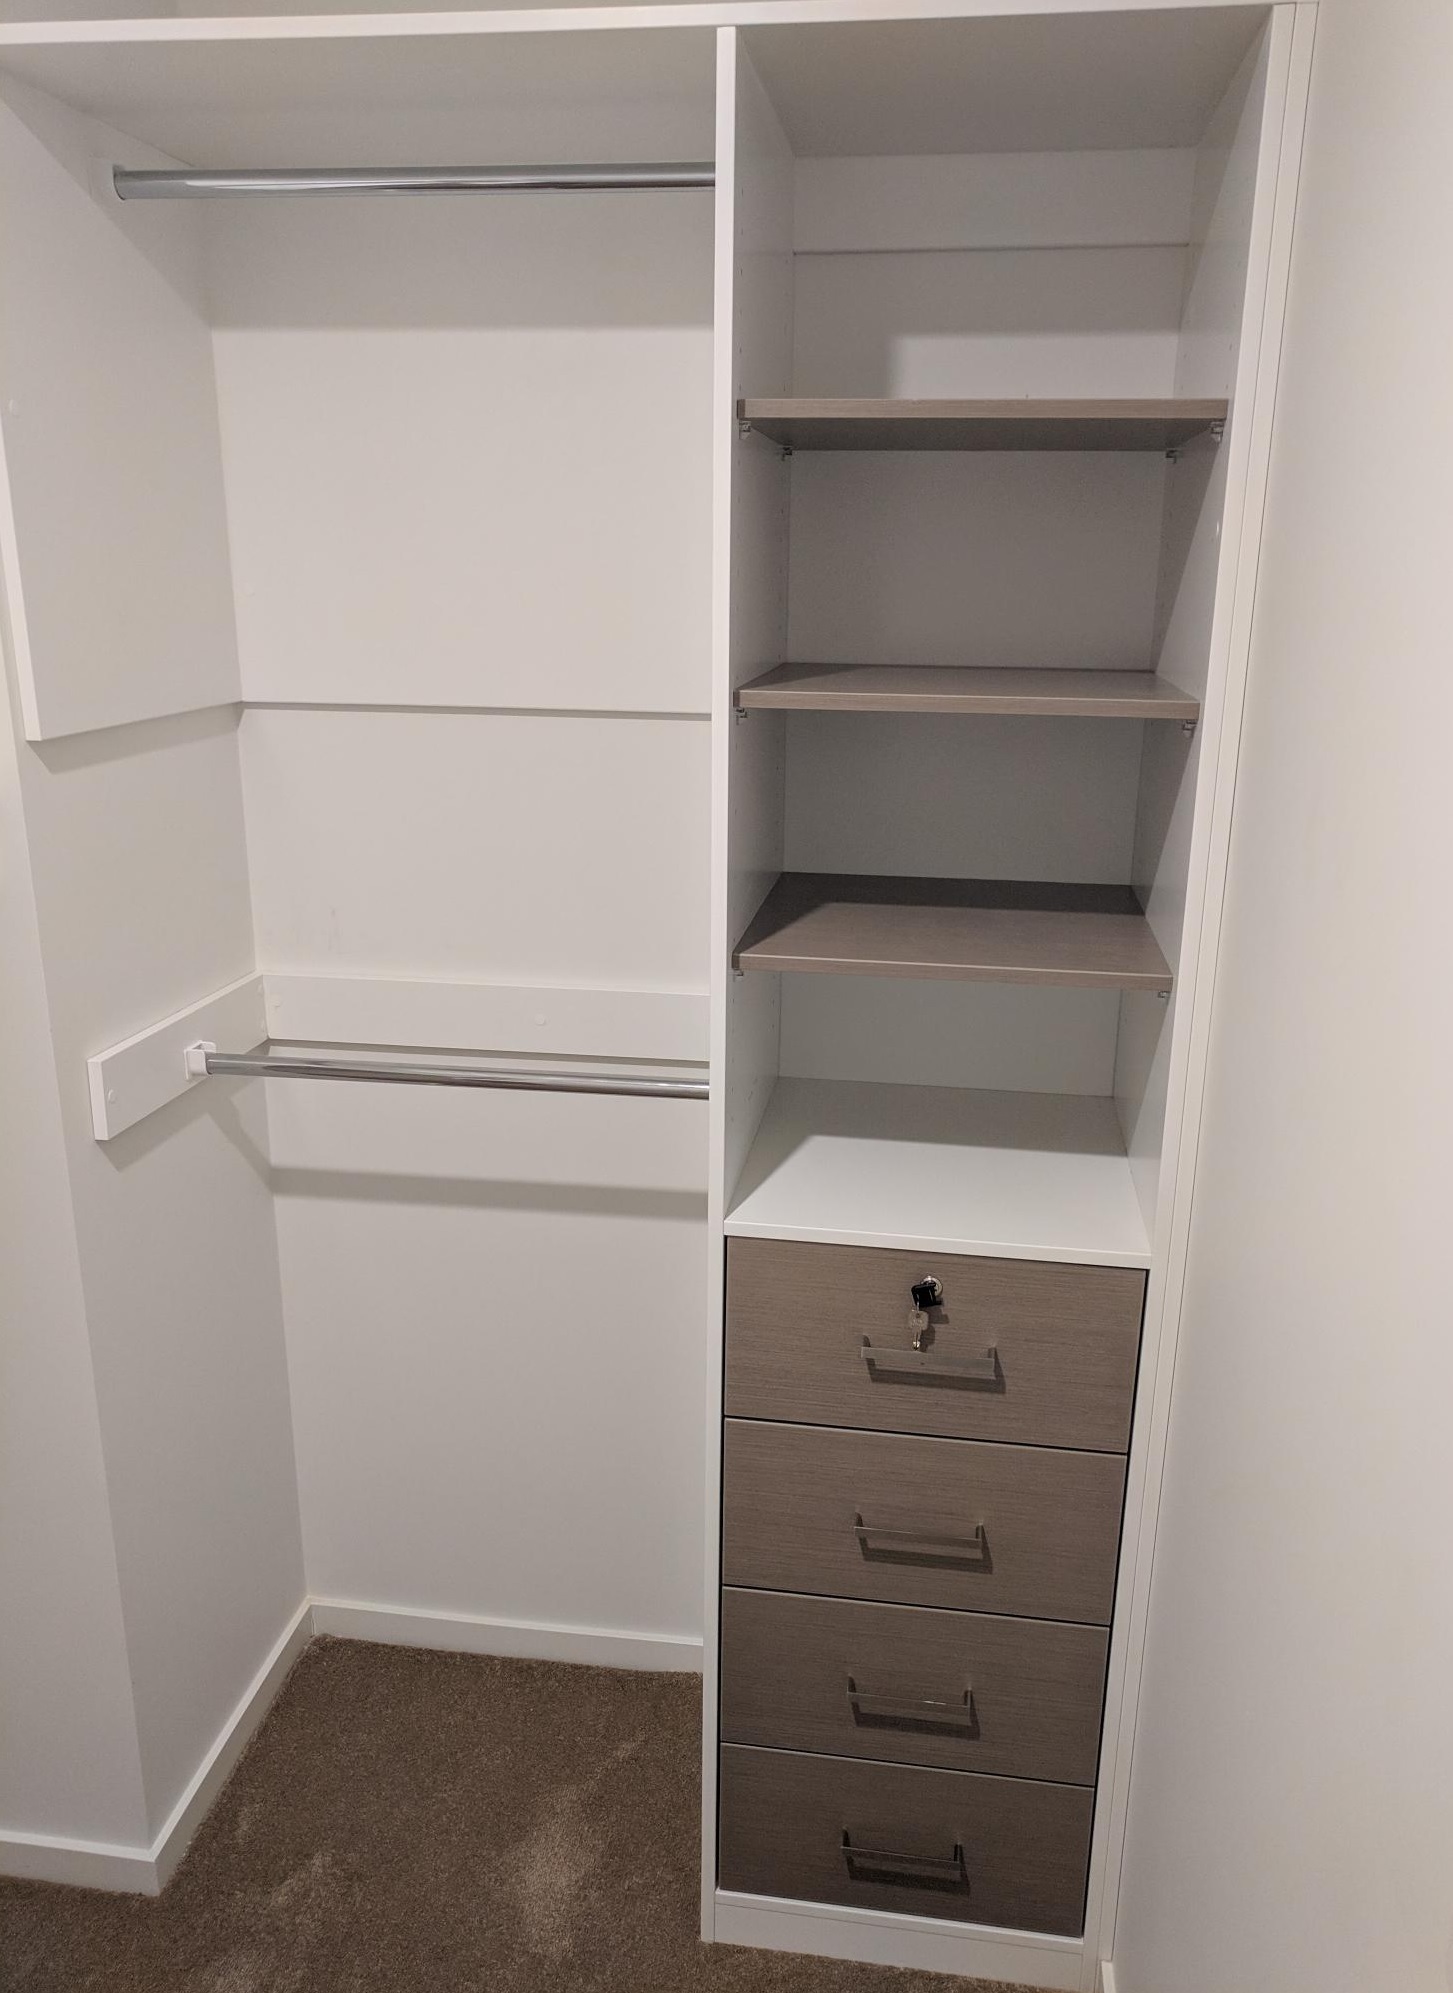 built in wardrobes, adjustable shelving, hanging room with drawers with lock